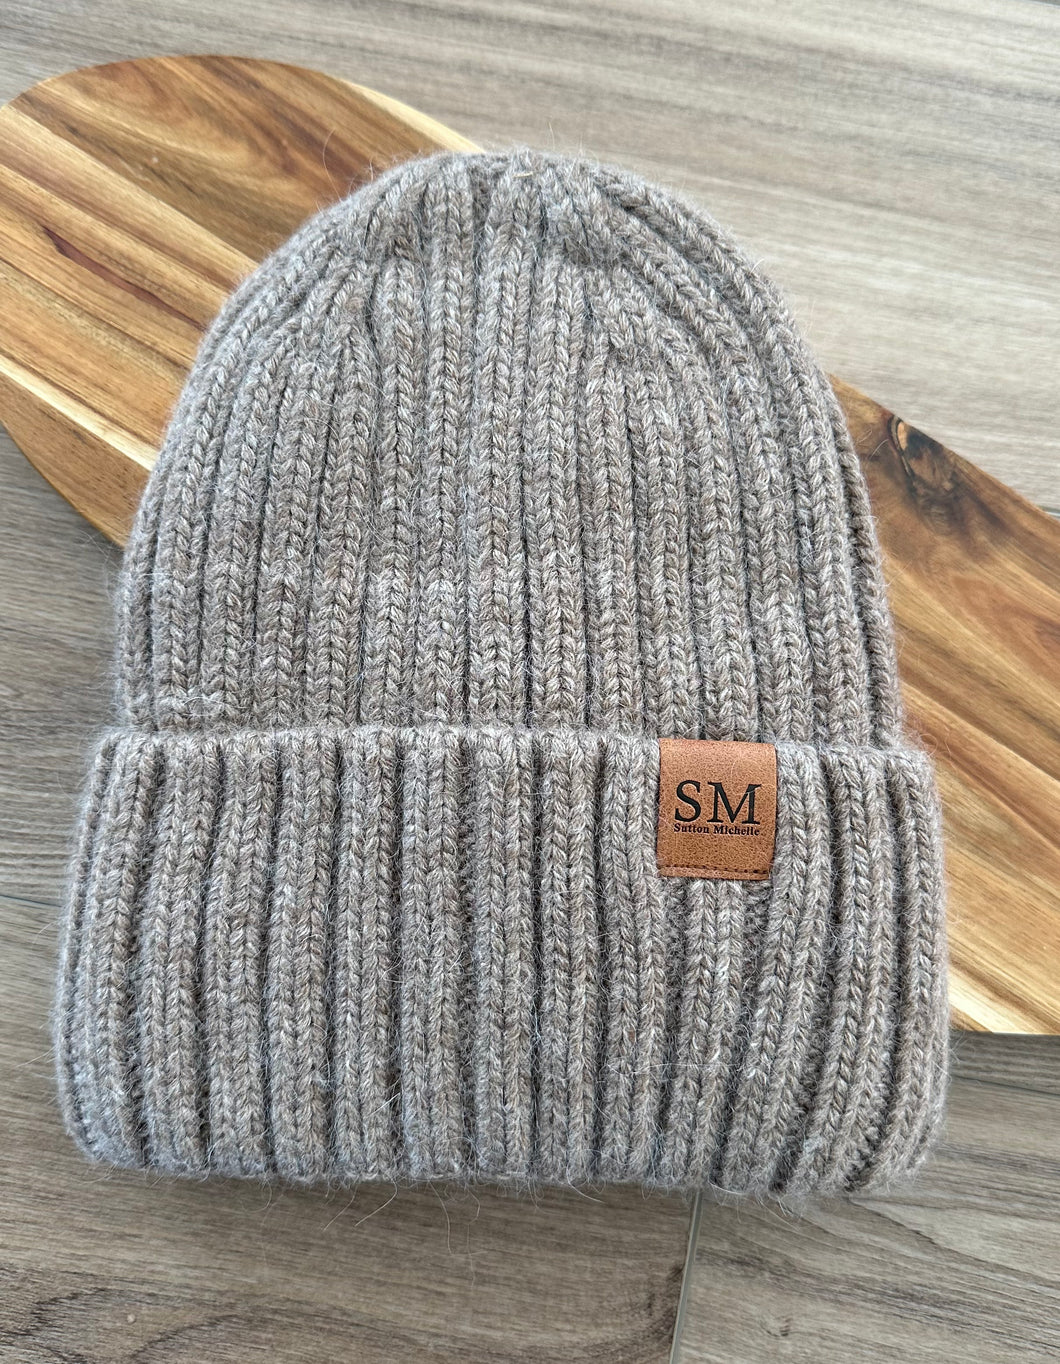 Satin lined cashmere blend knit toques